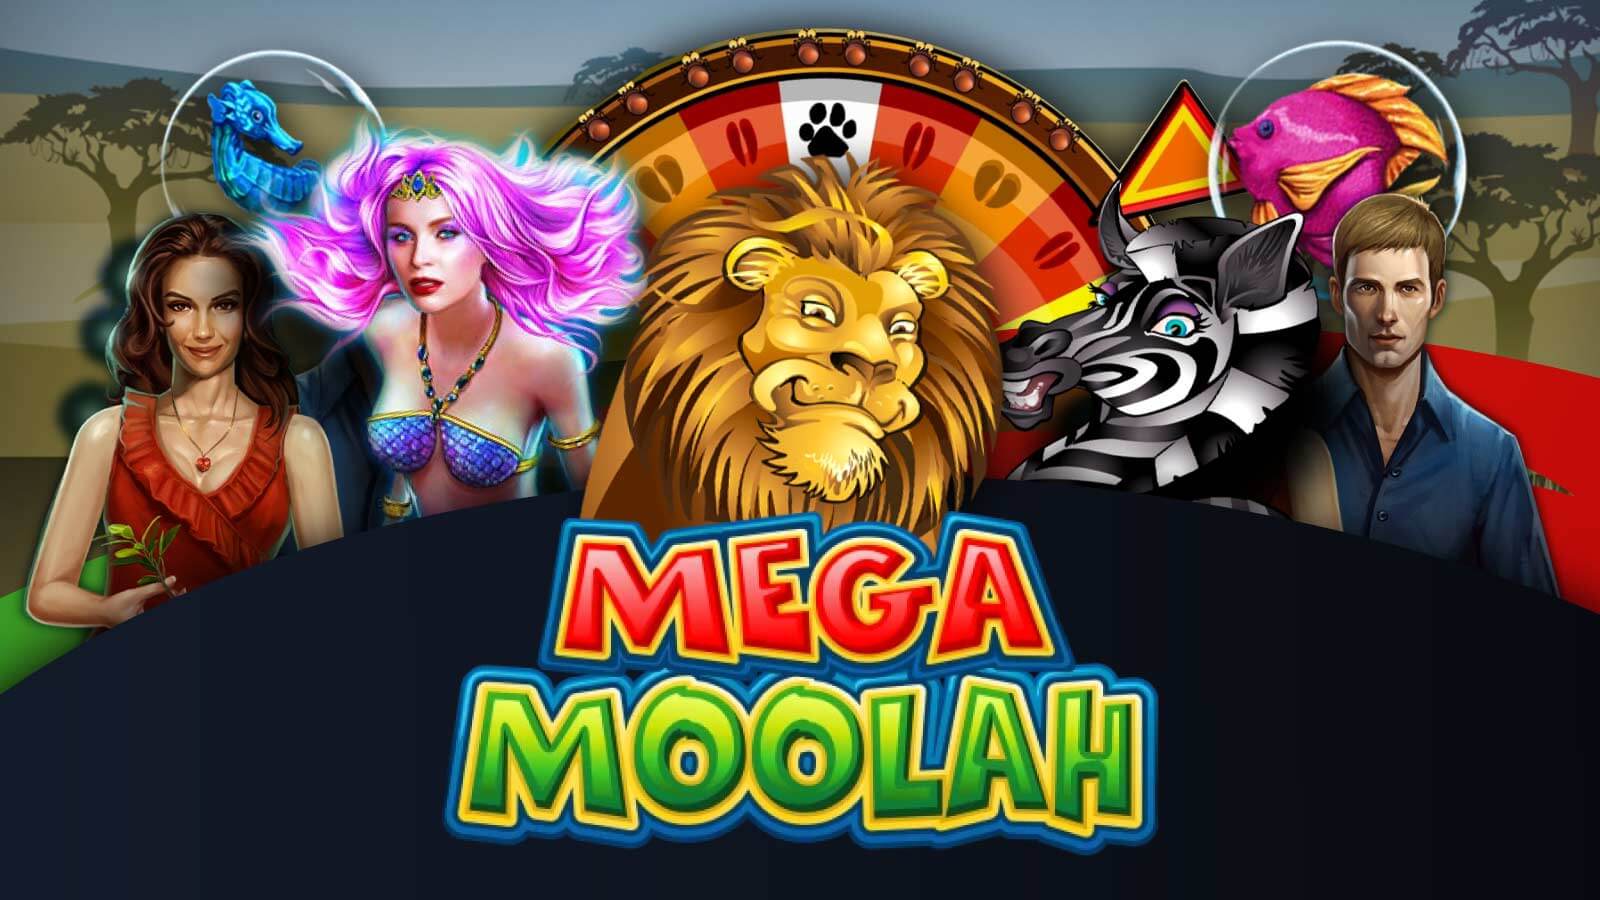 Top Mega Moolah Jackpots to Try Out